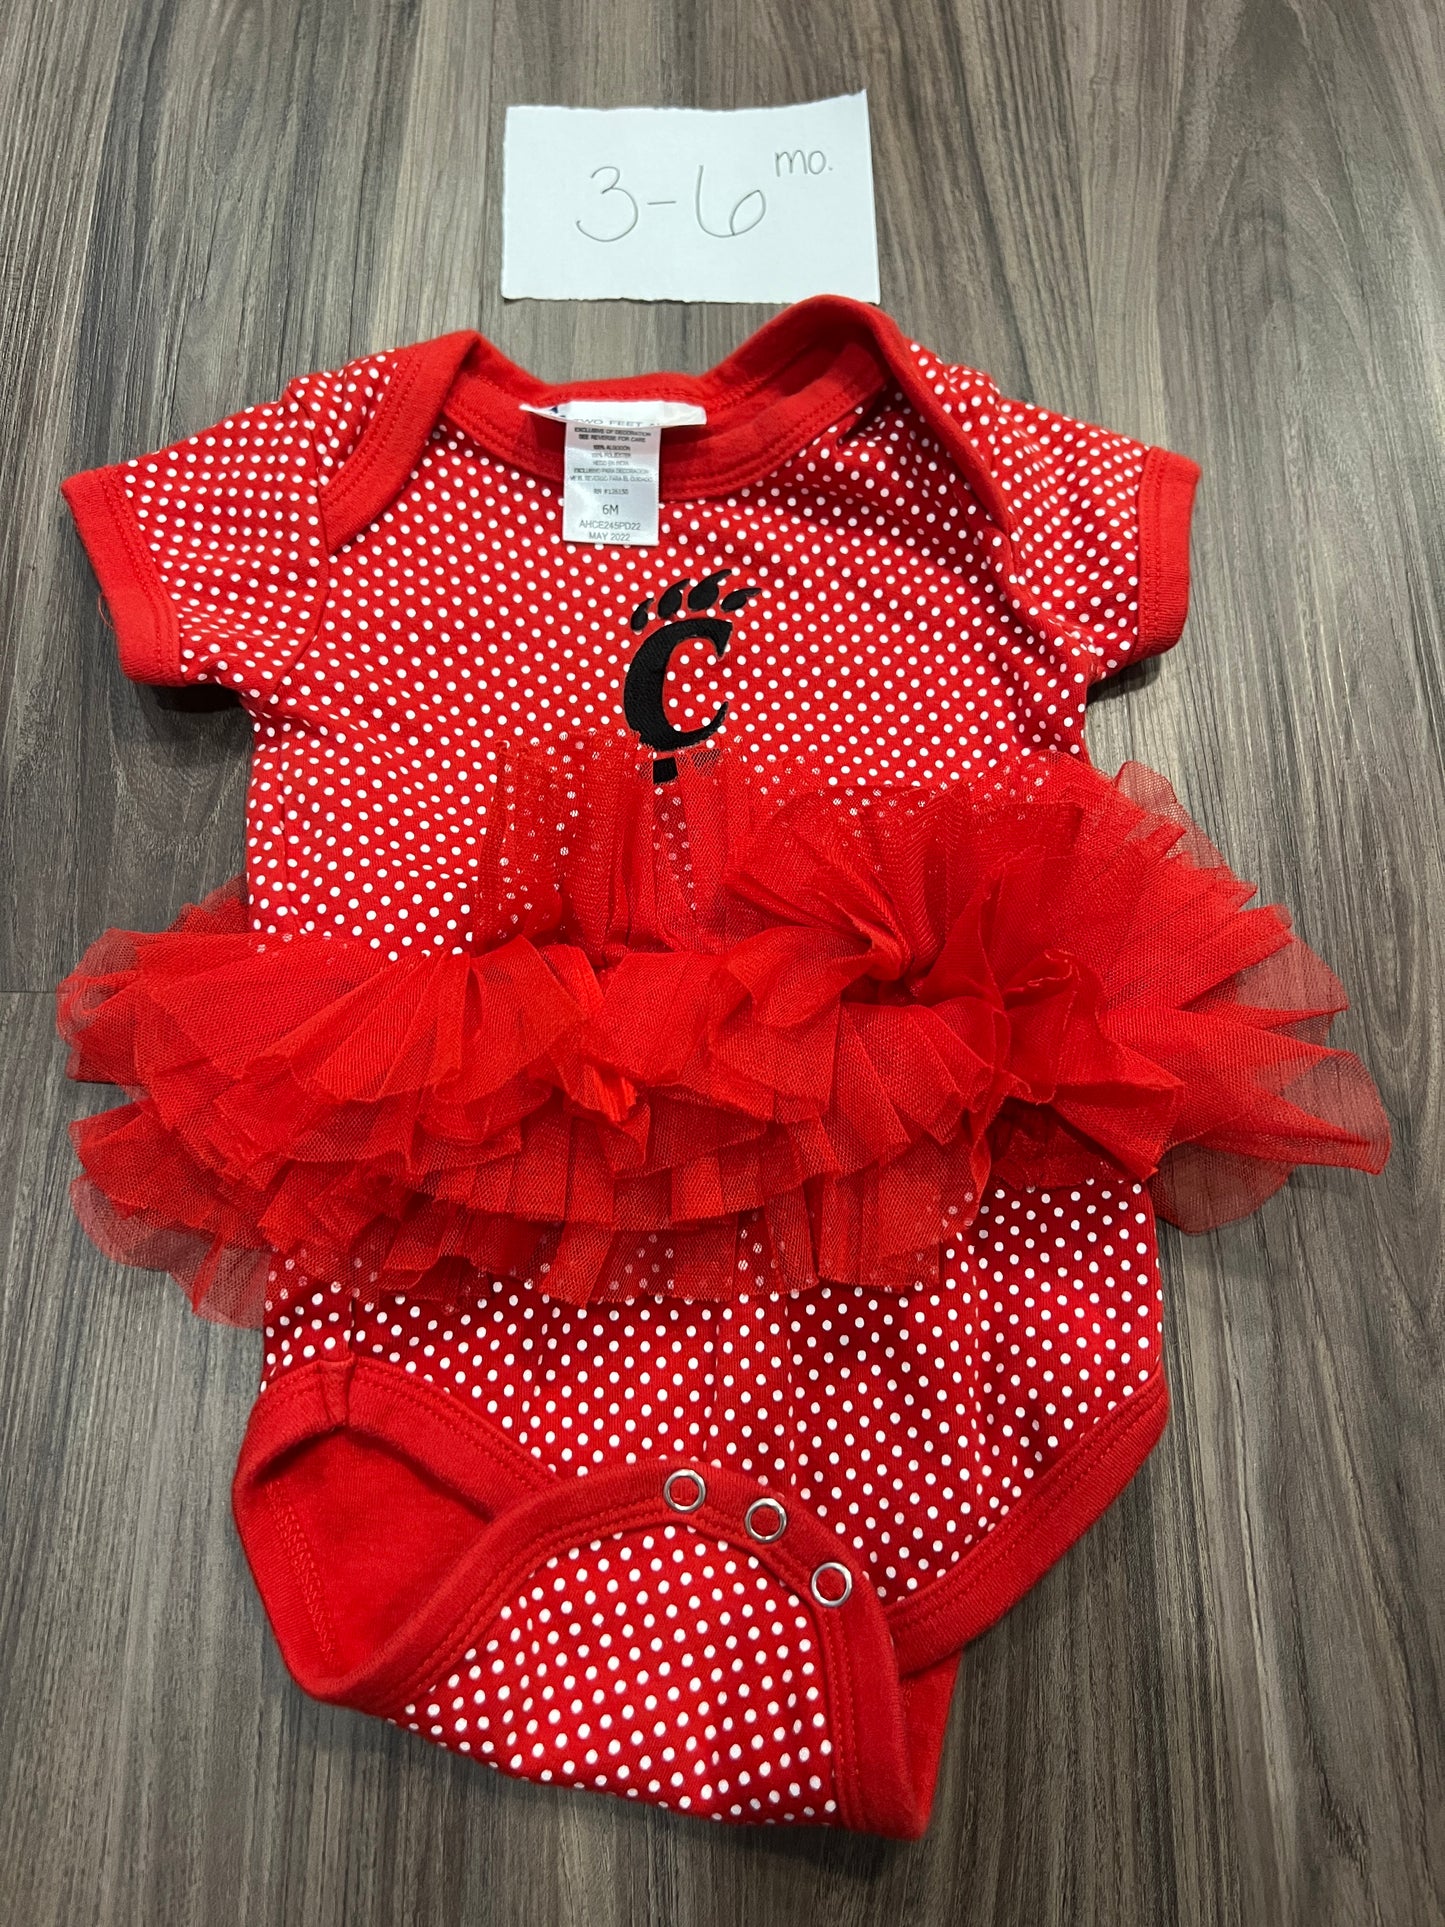 3-6 Mo -  - Red and White Polka Dot Tutu UC Bodysuit - PU 45236 Except Semiannual Sale